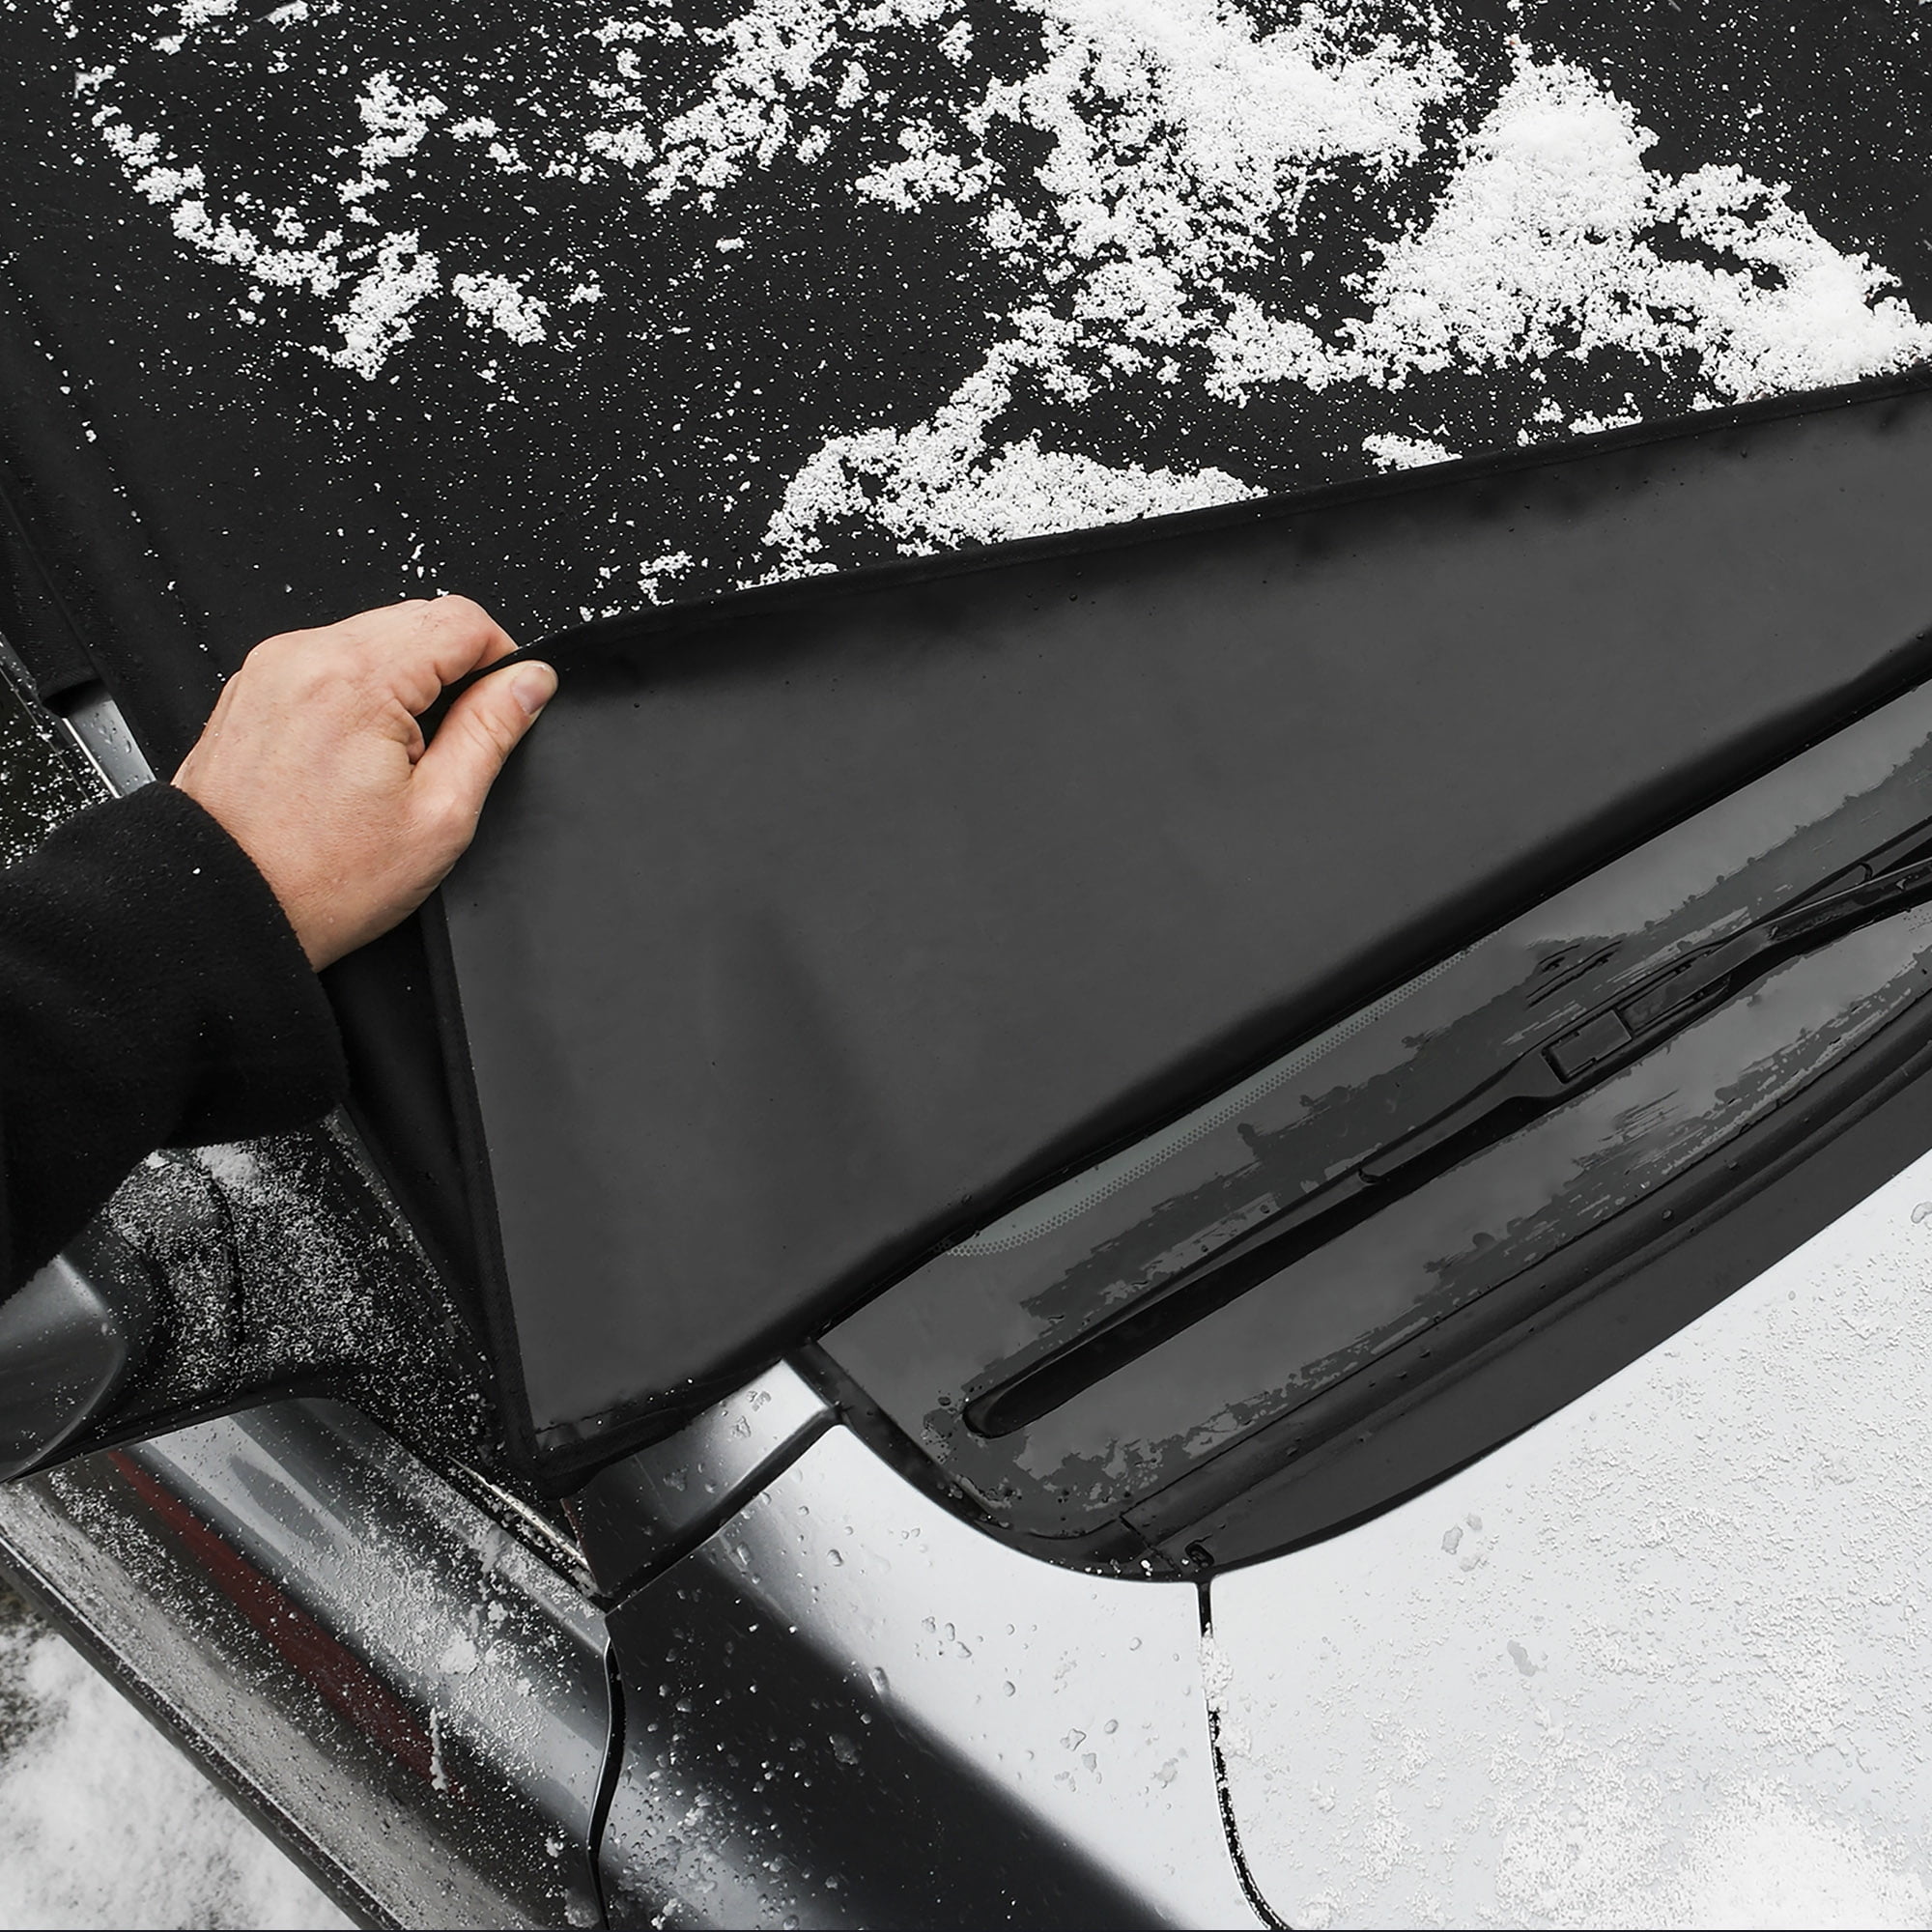 FrostGuard™ - Electromagnetic Ice & Snow Car Heater – My Frost Guard™